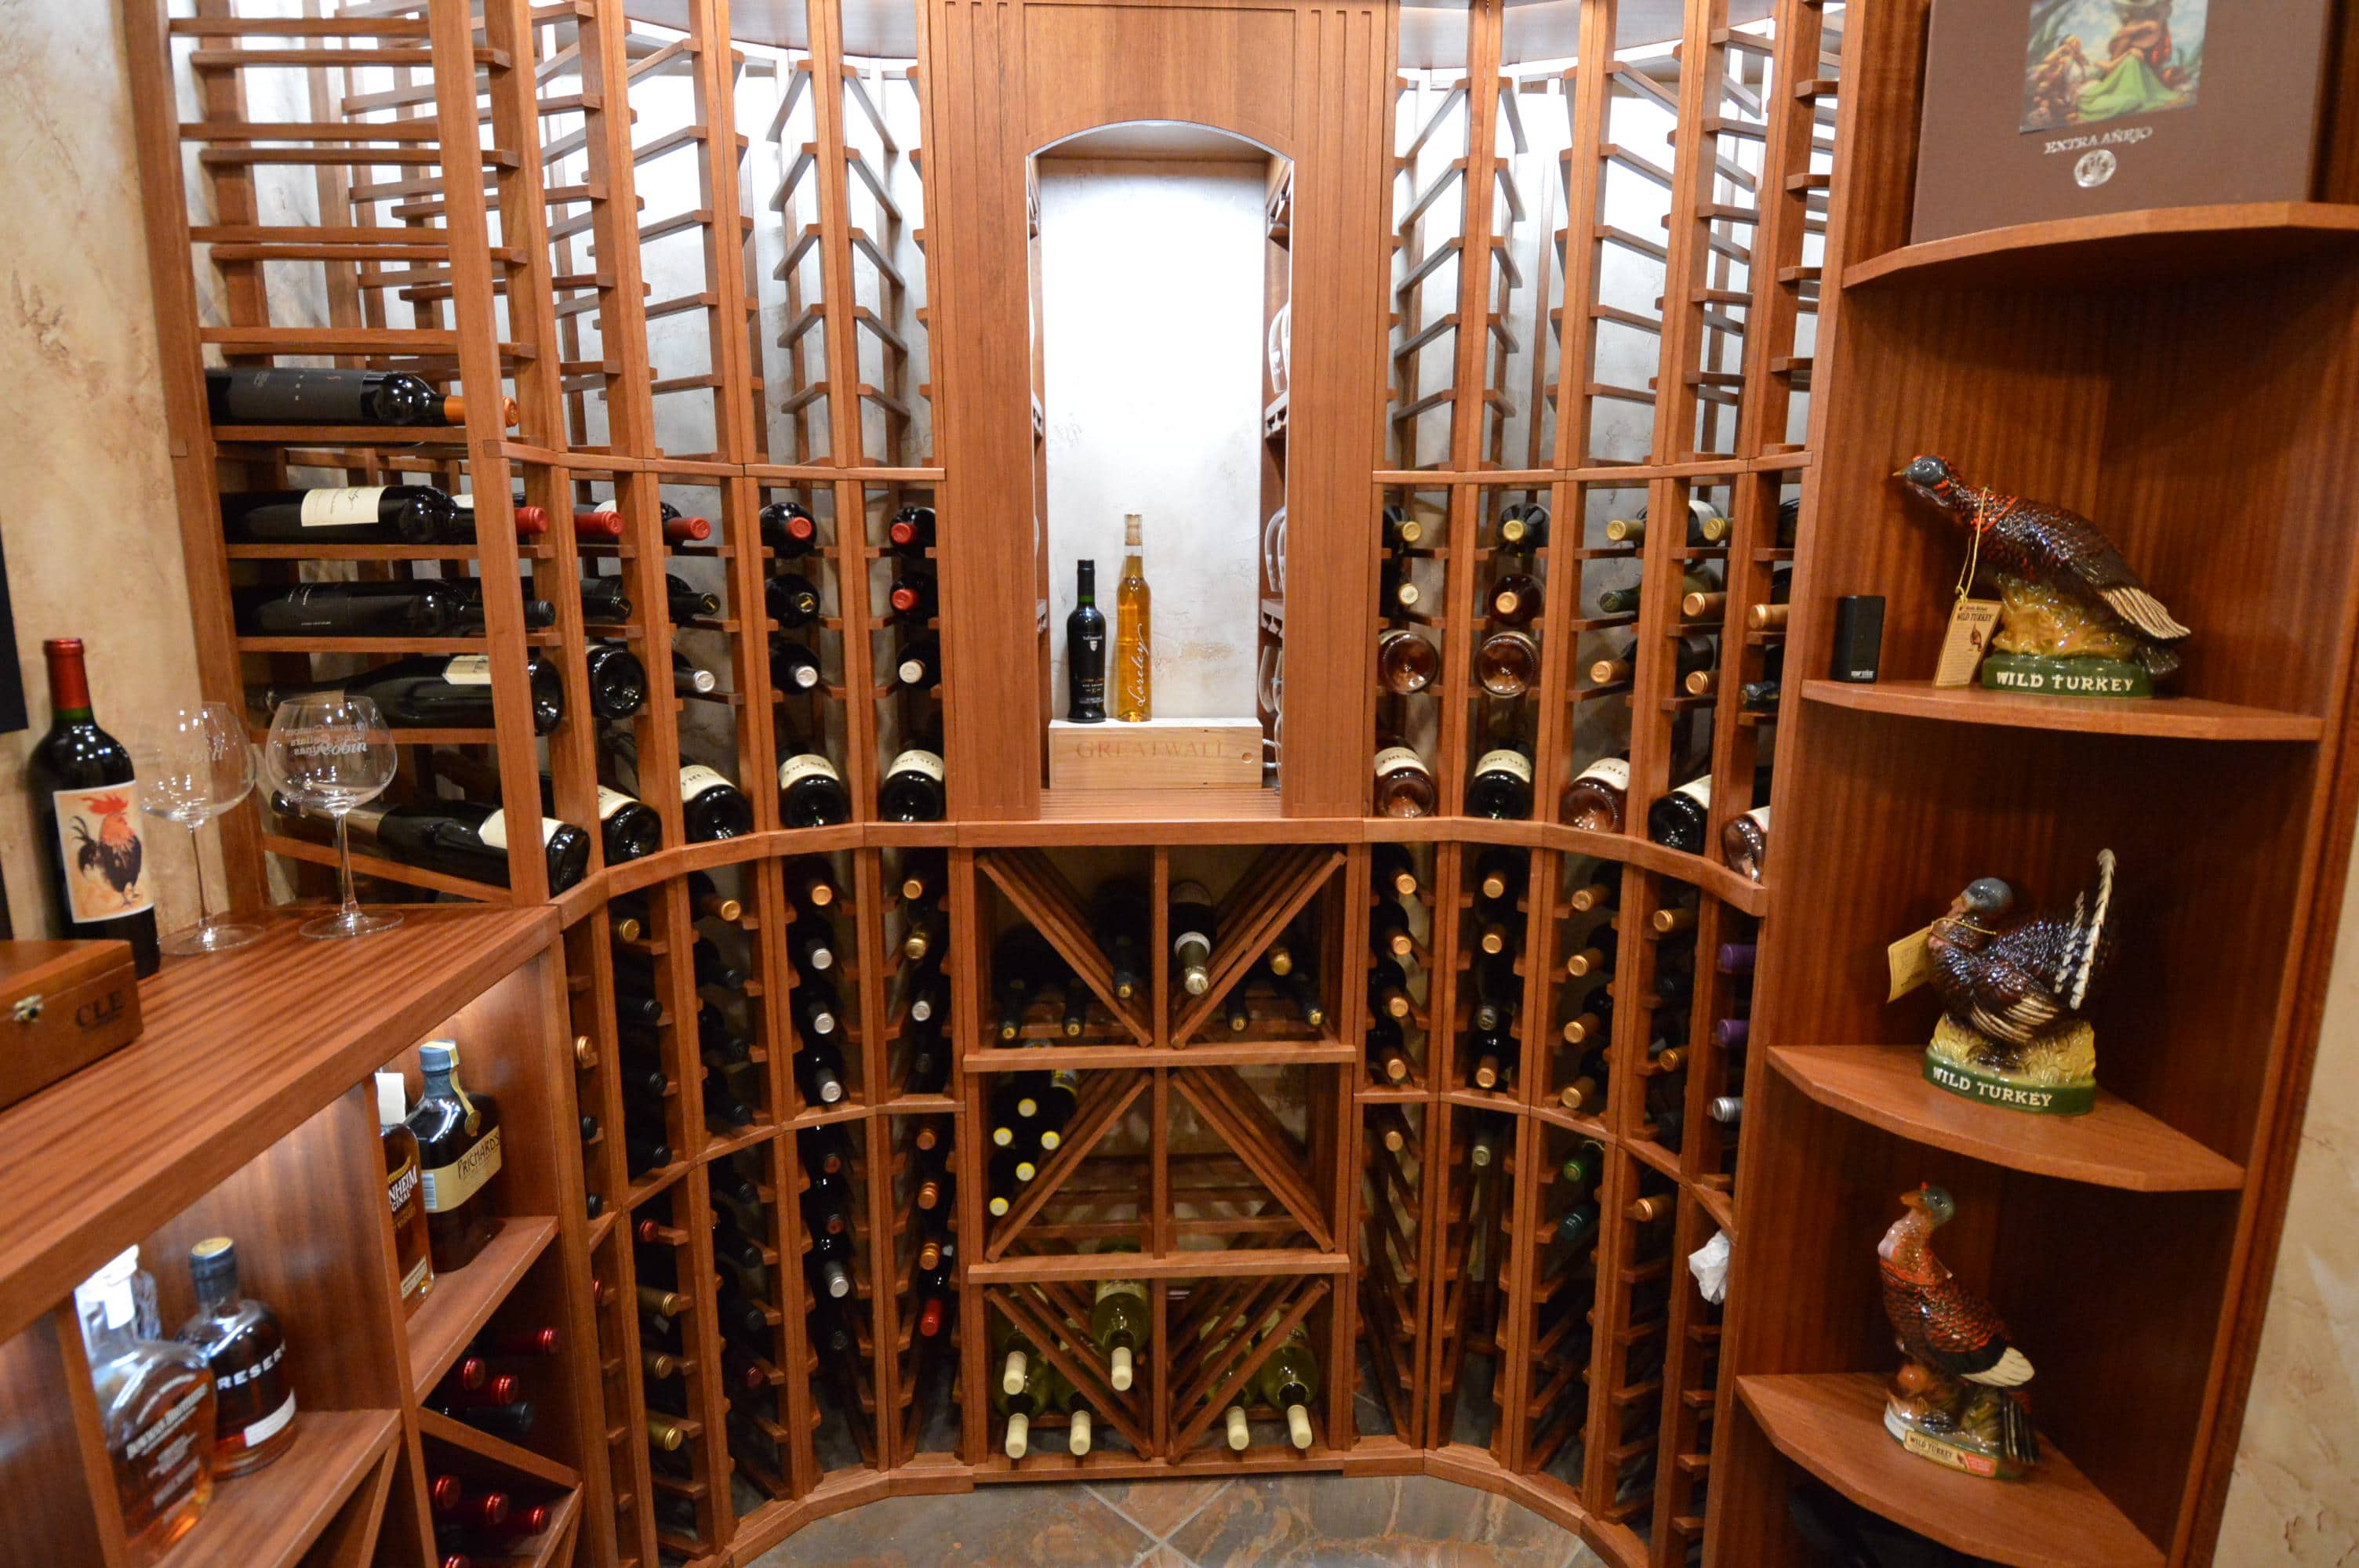 Learn more about wooden wine racks! Click here!